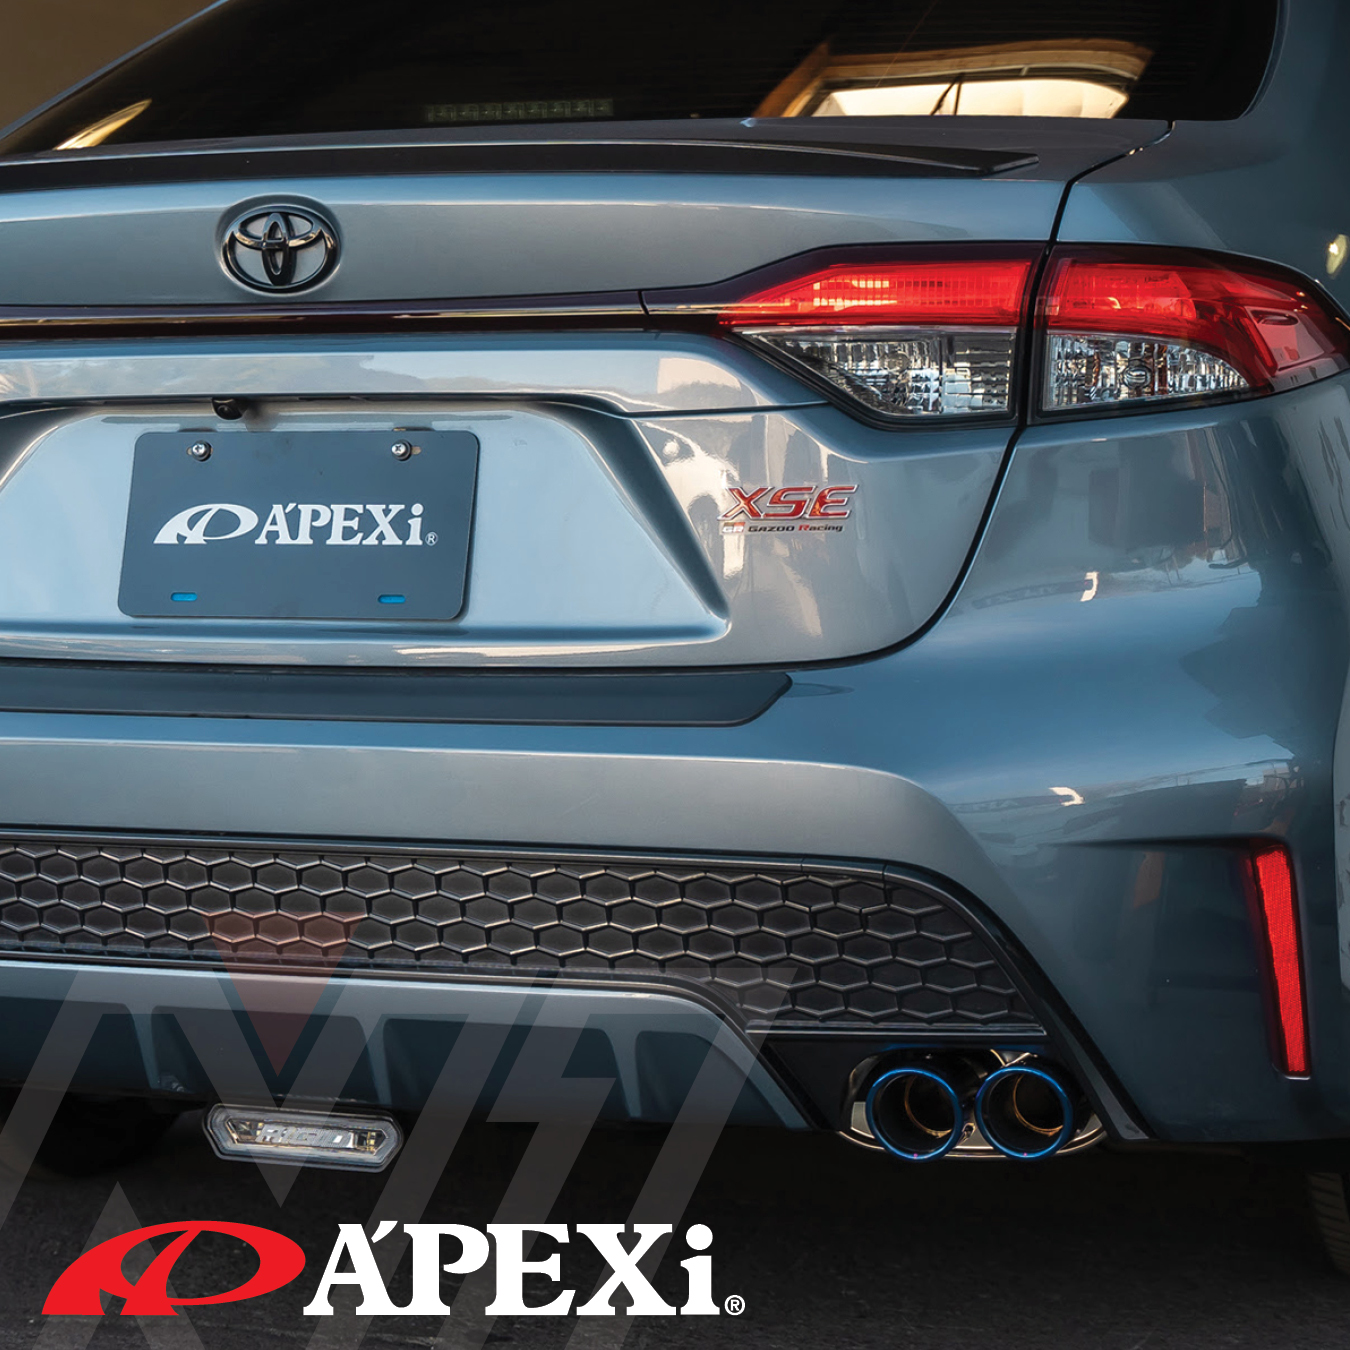 A’PEXi Releases New Dual N1 Evo Exhaust for 2020+ Toyota Corolla